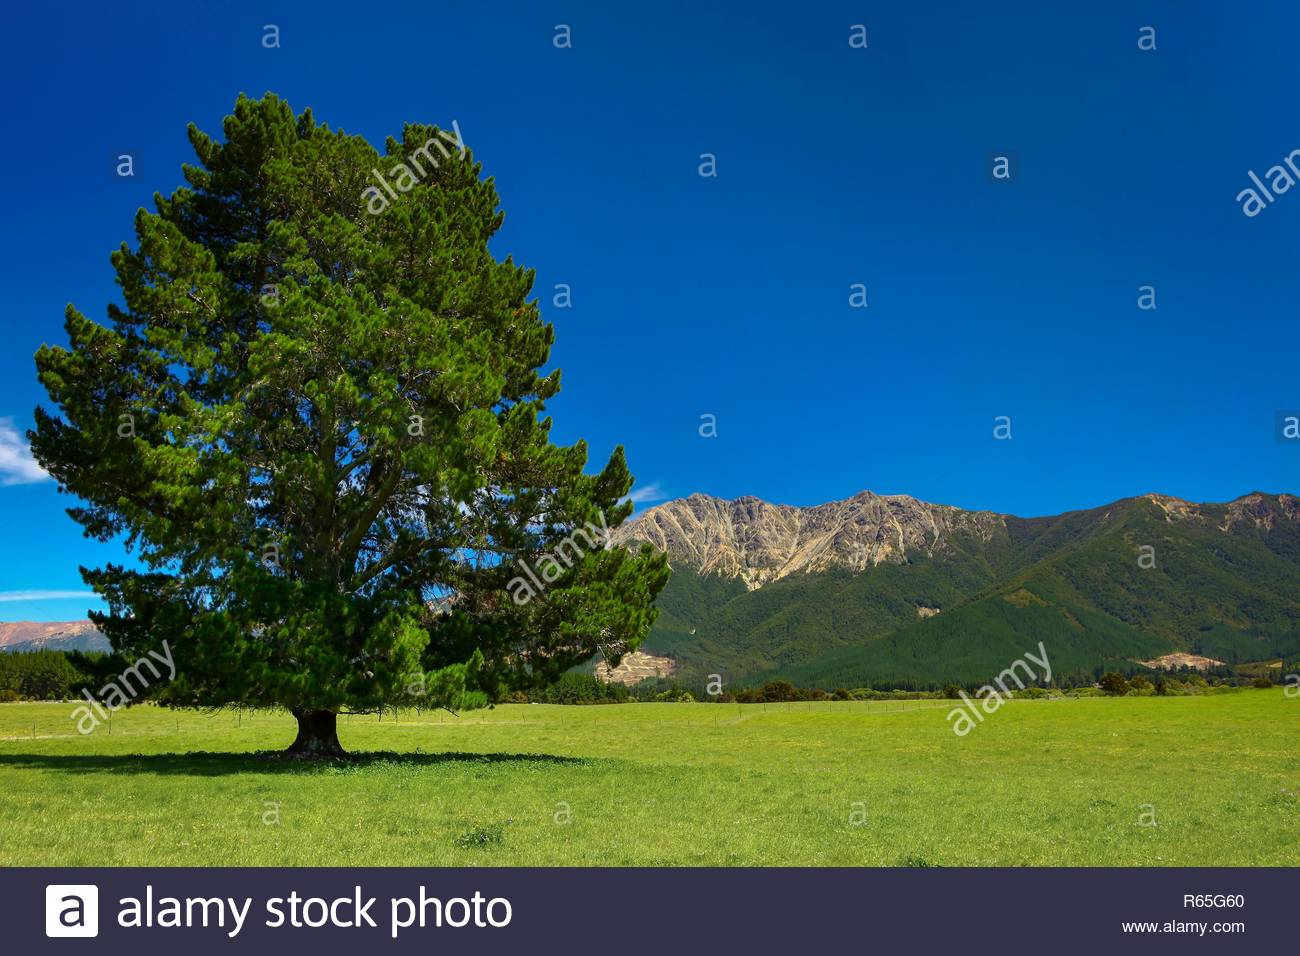 A Tree In Field With The Richmond Mountain Range